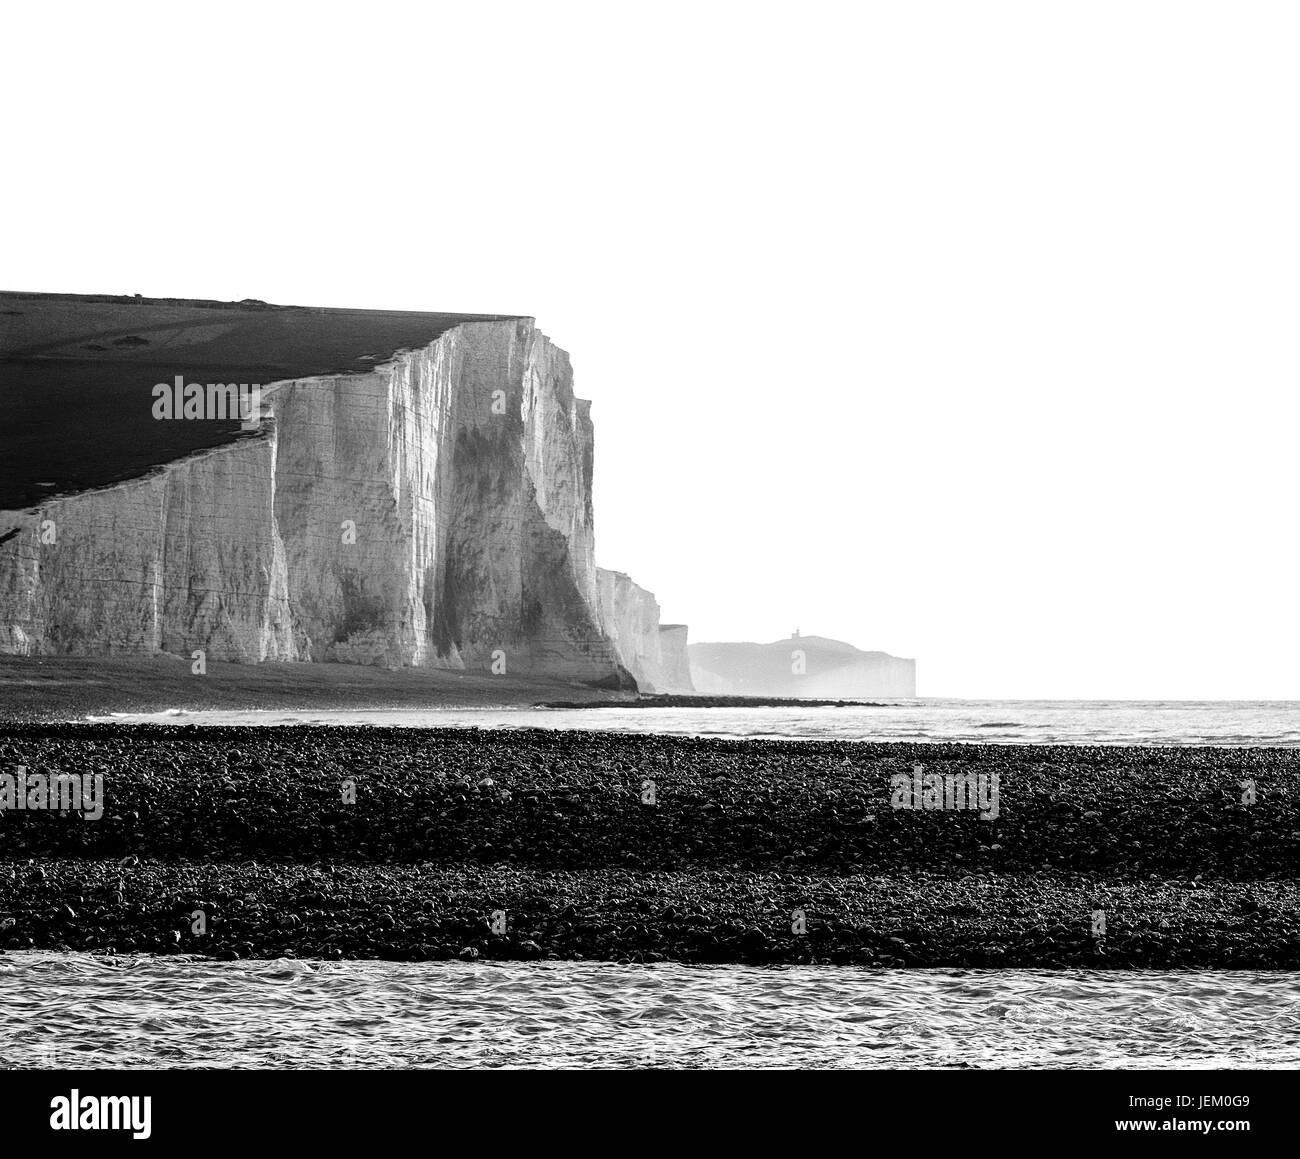 The Seven sisters at Cuckmere haven East Sussex England, photographed on medium format 120 Black and white film Stock Photo